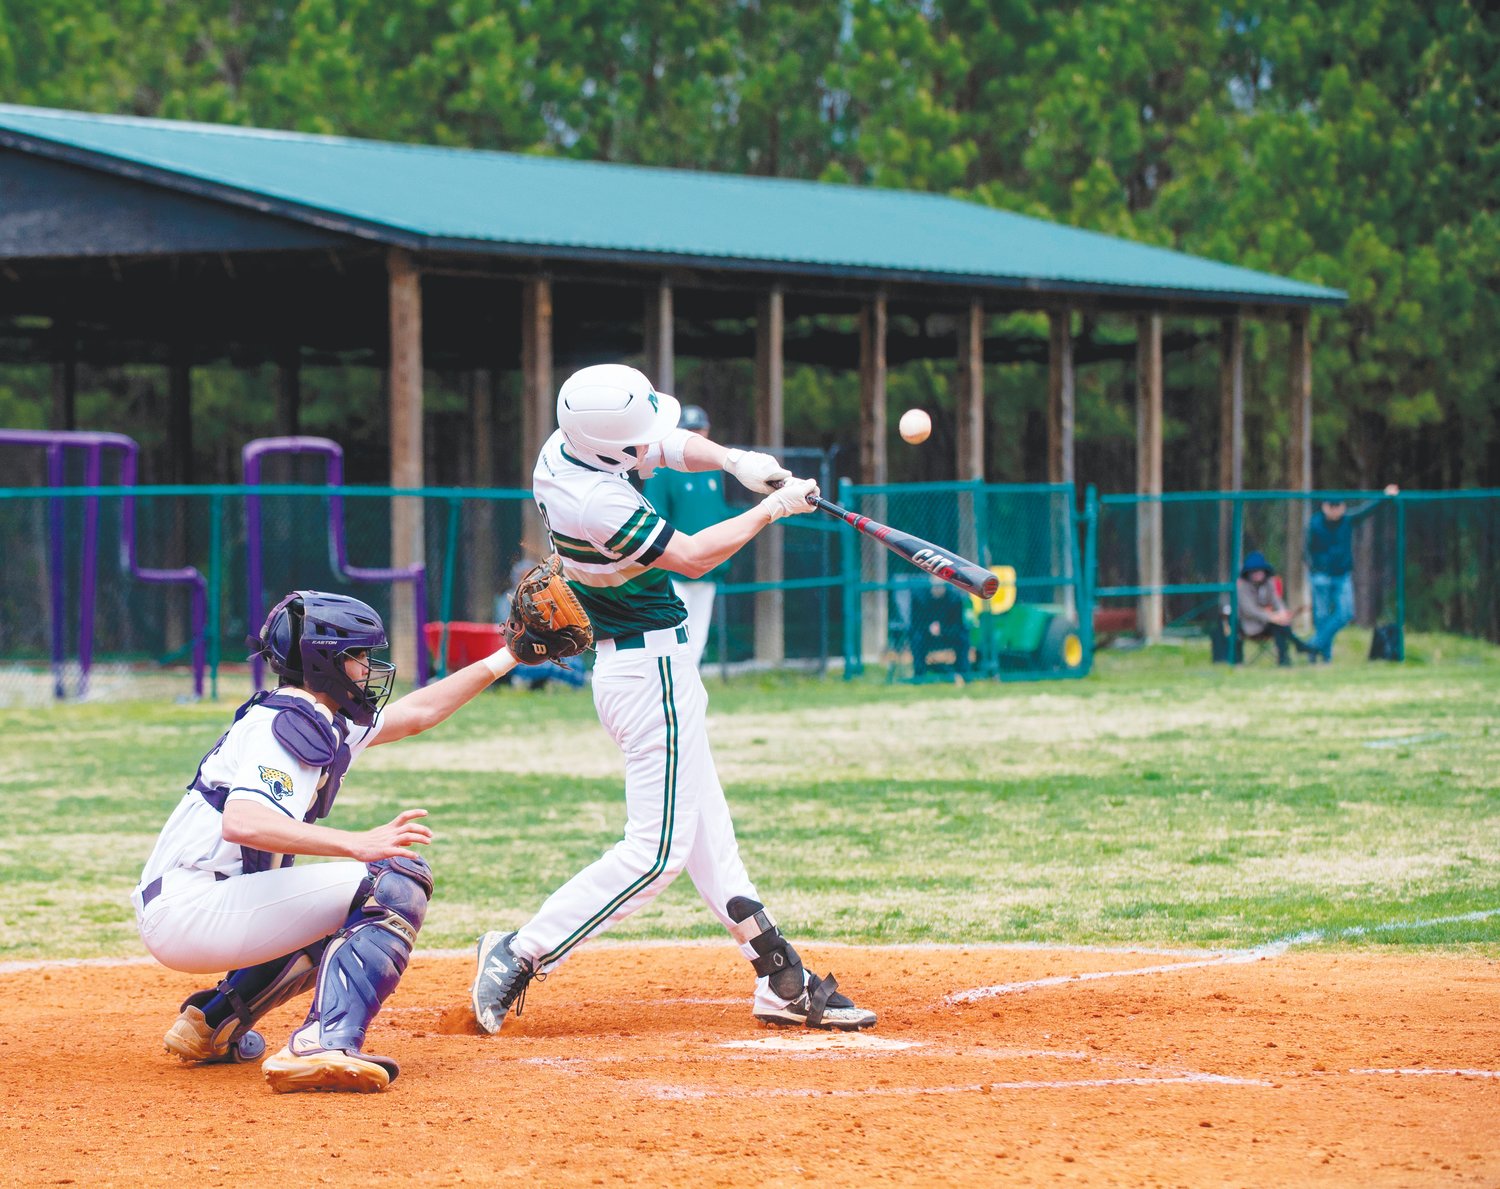 Northwood outfielder Kaleb Howell hits a pitch during the Chargers' 7-3 win over the Carrboro Jaguars last Saturday. Howell was one of seven Chargers with a hit on the day.